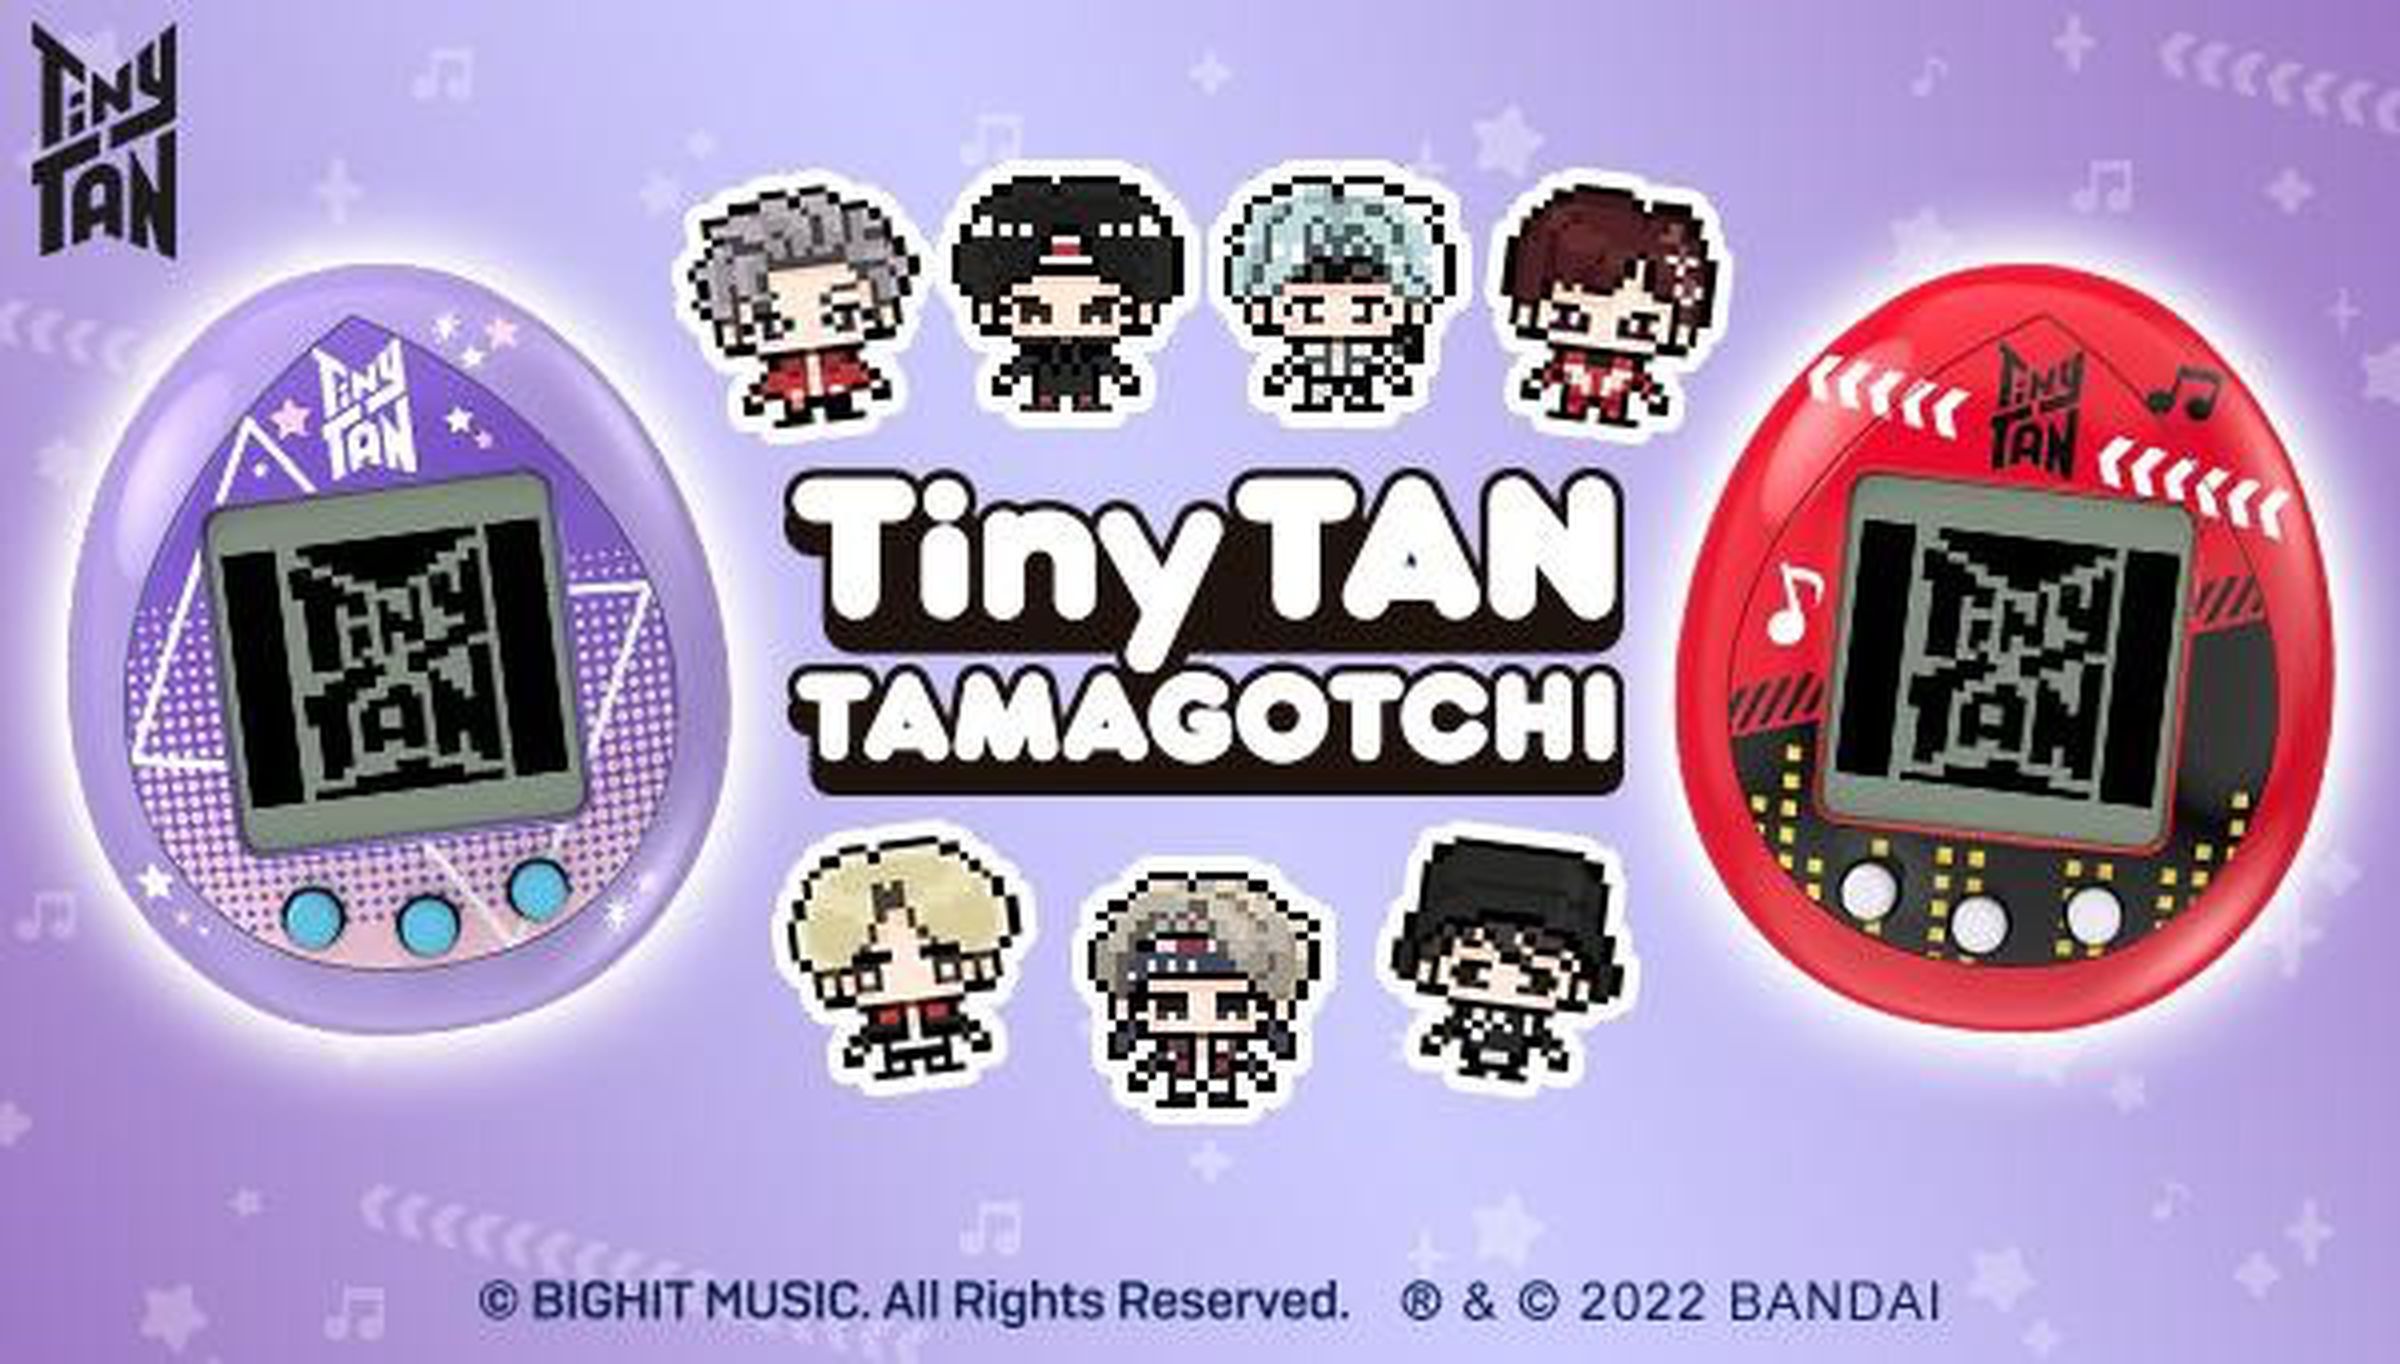 Purple and red models of the TinyTan Tamagotchi on a purple background. Between them are the seven TinyTan Tamagotchi characters and the text TinyTan Tamagotchi. In the top left corner is the TinyTan logo.